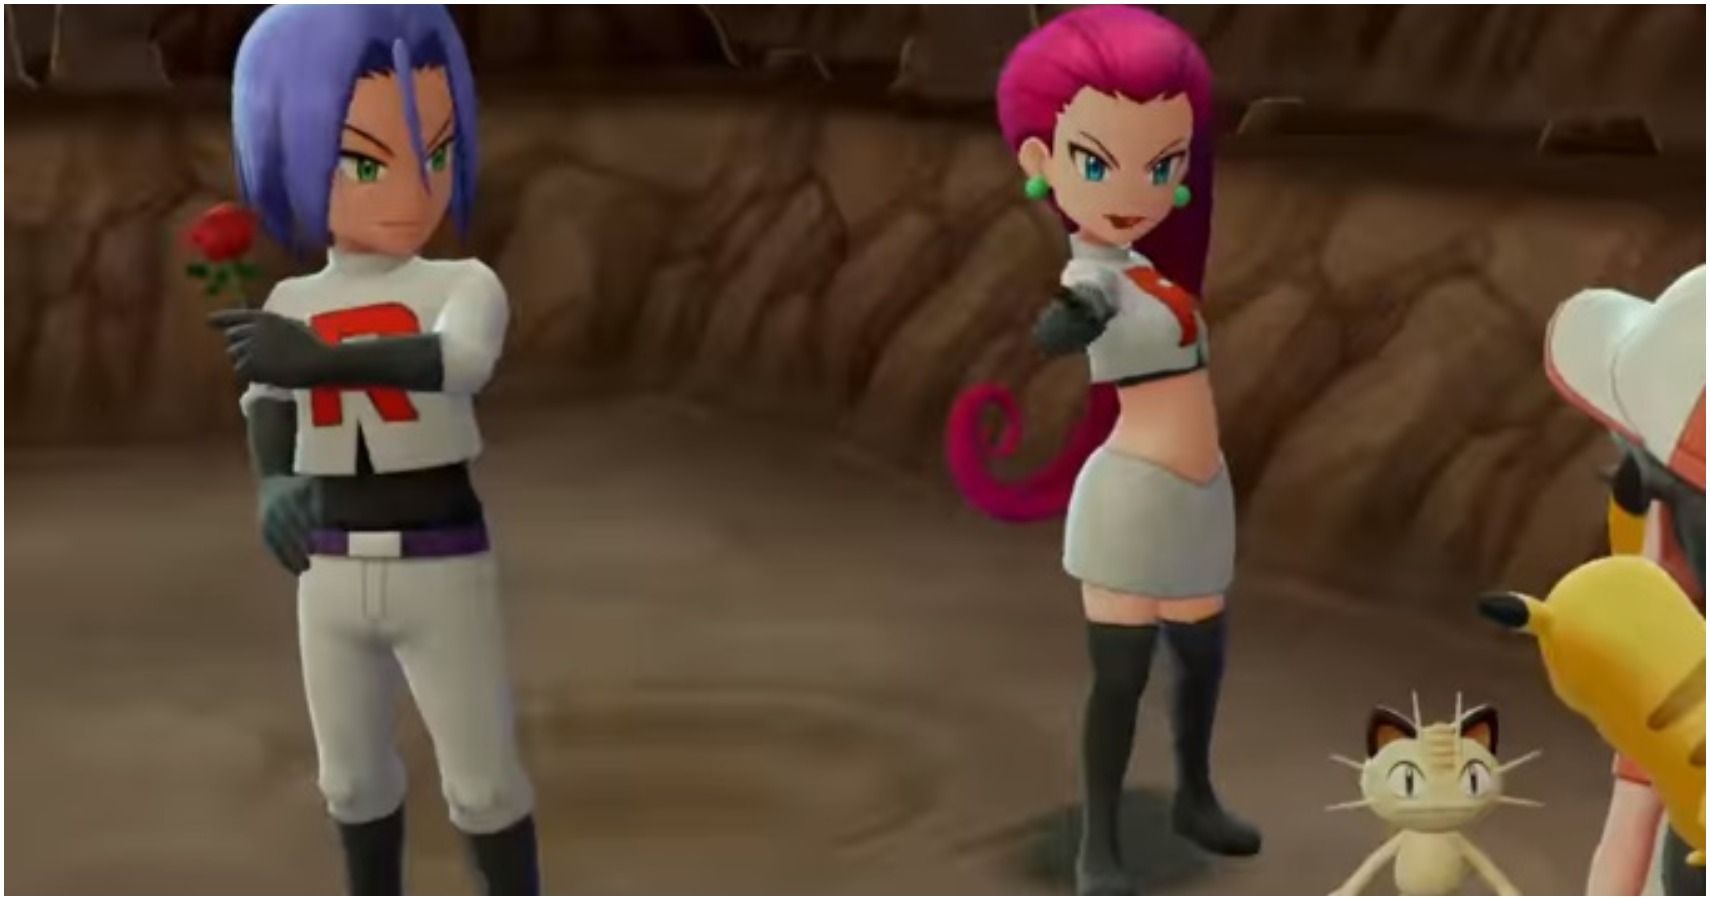 Team Rockets Jessie James And Meowth Are Coming To Pokémon Lets Go Pikachu & Lets Go Eevee